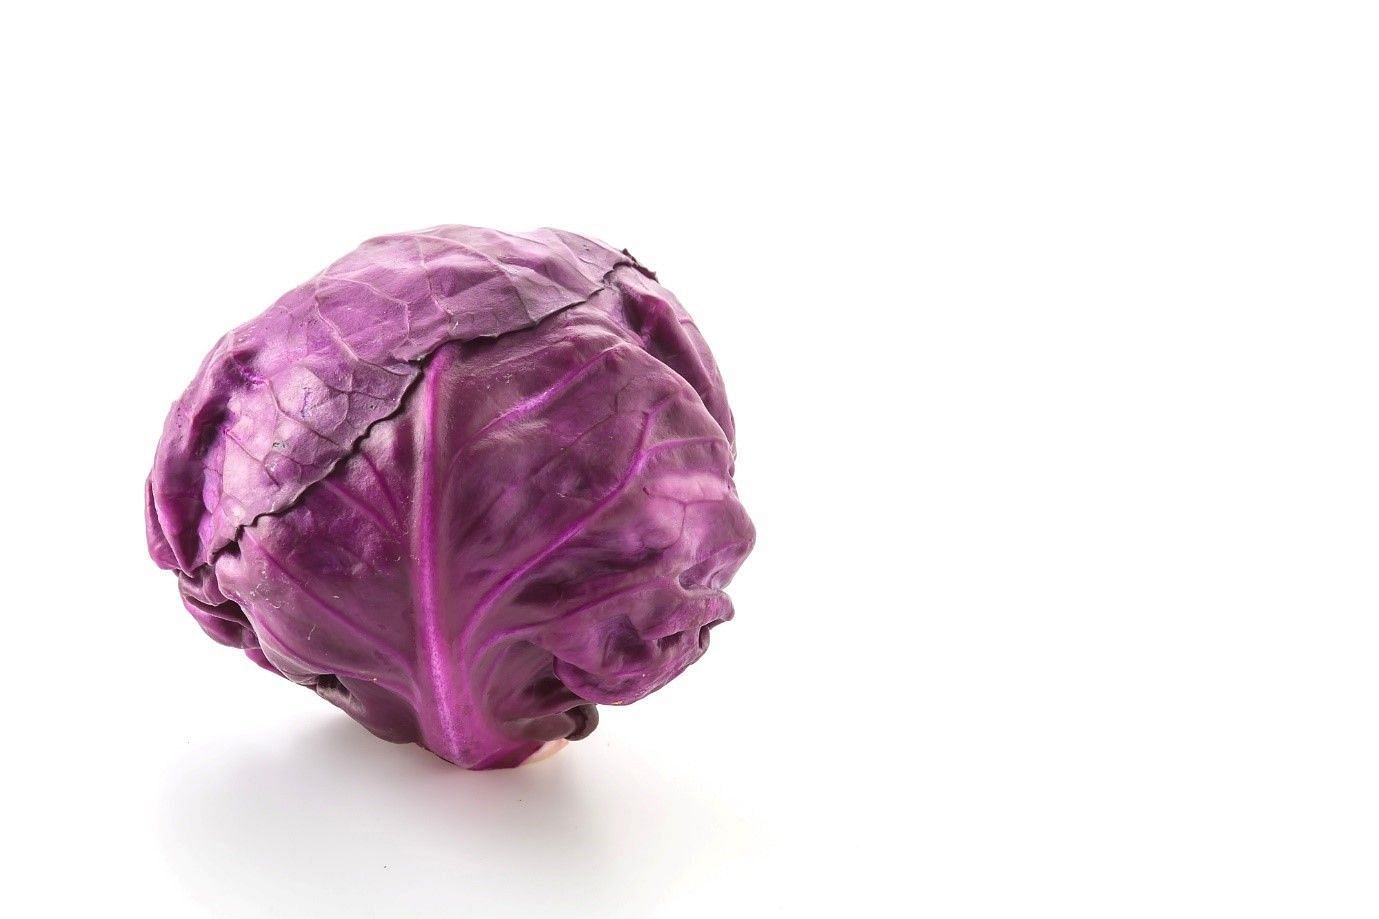 Benefits of red cabbage (image by topntp26 on freepik)